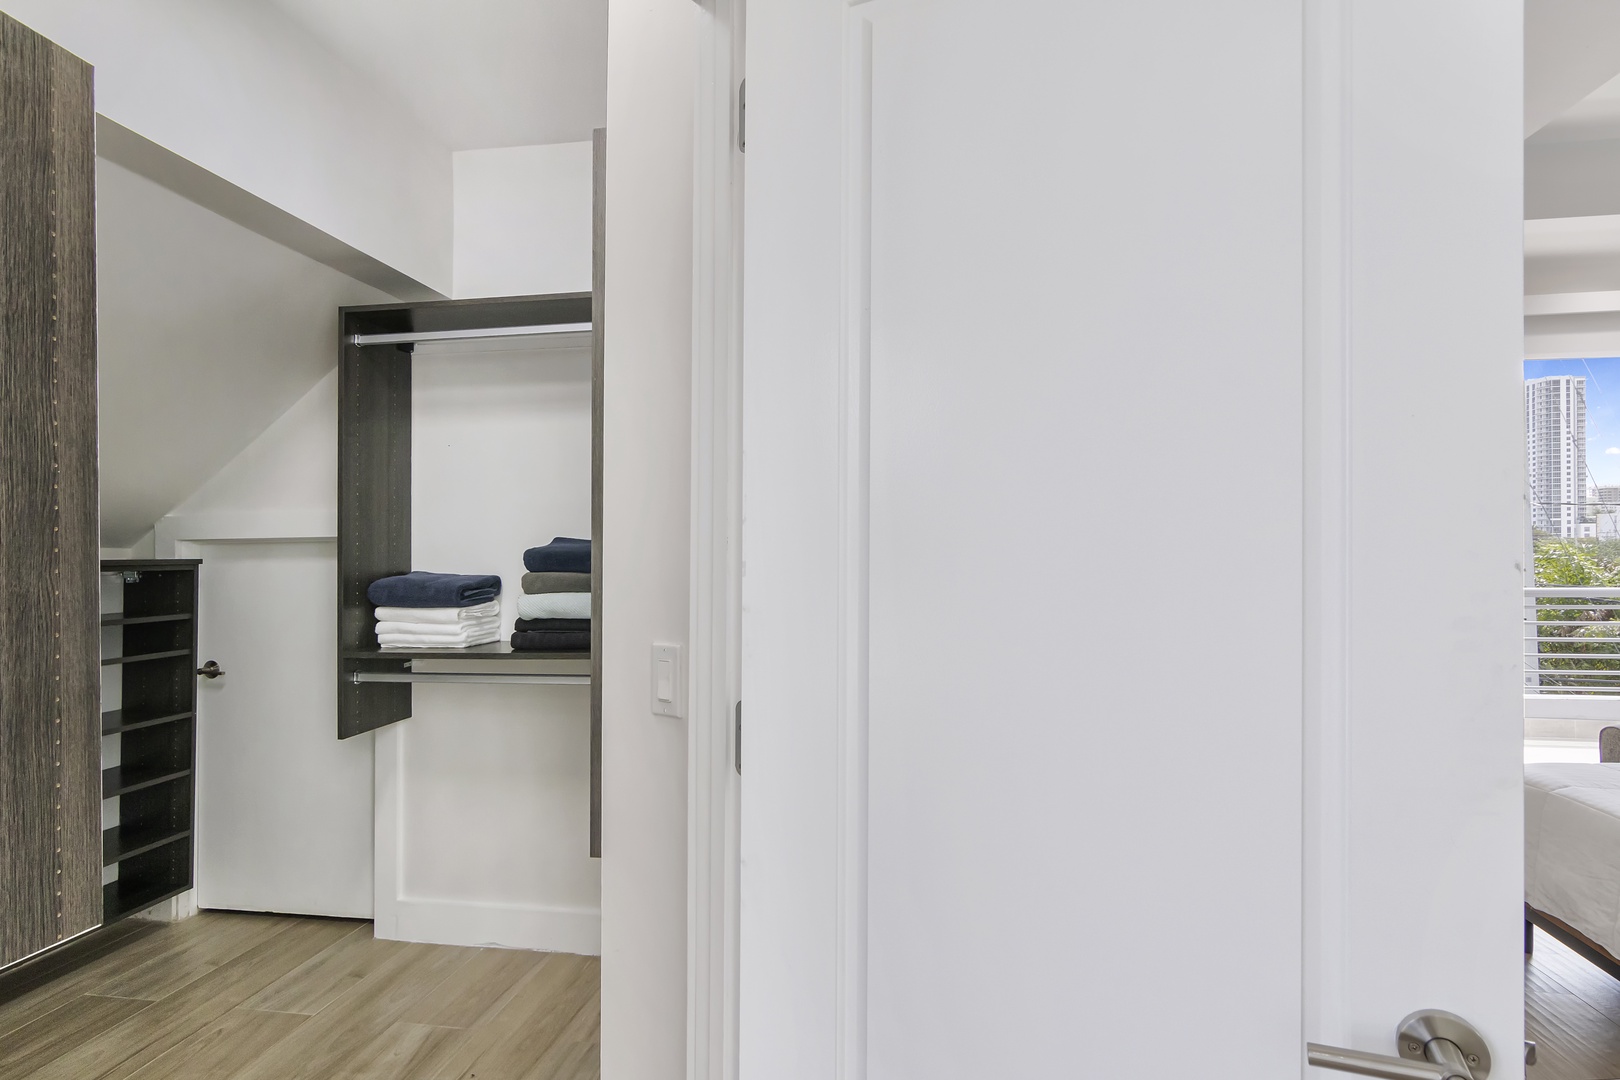 Keep clothes & bags neatly tucked away in the 3rd-floor walk-in closet